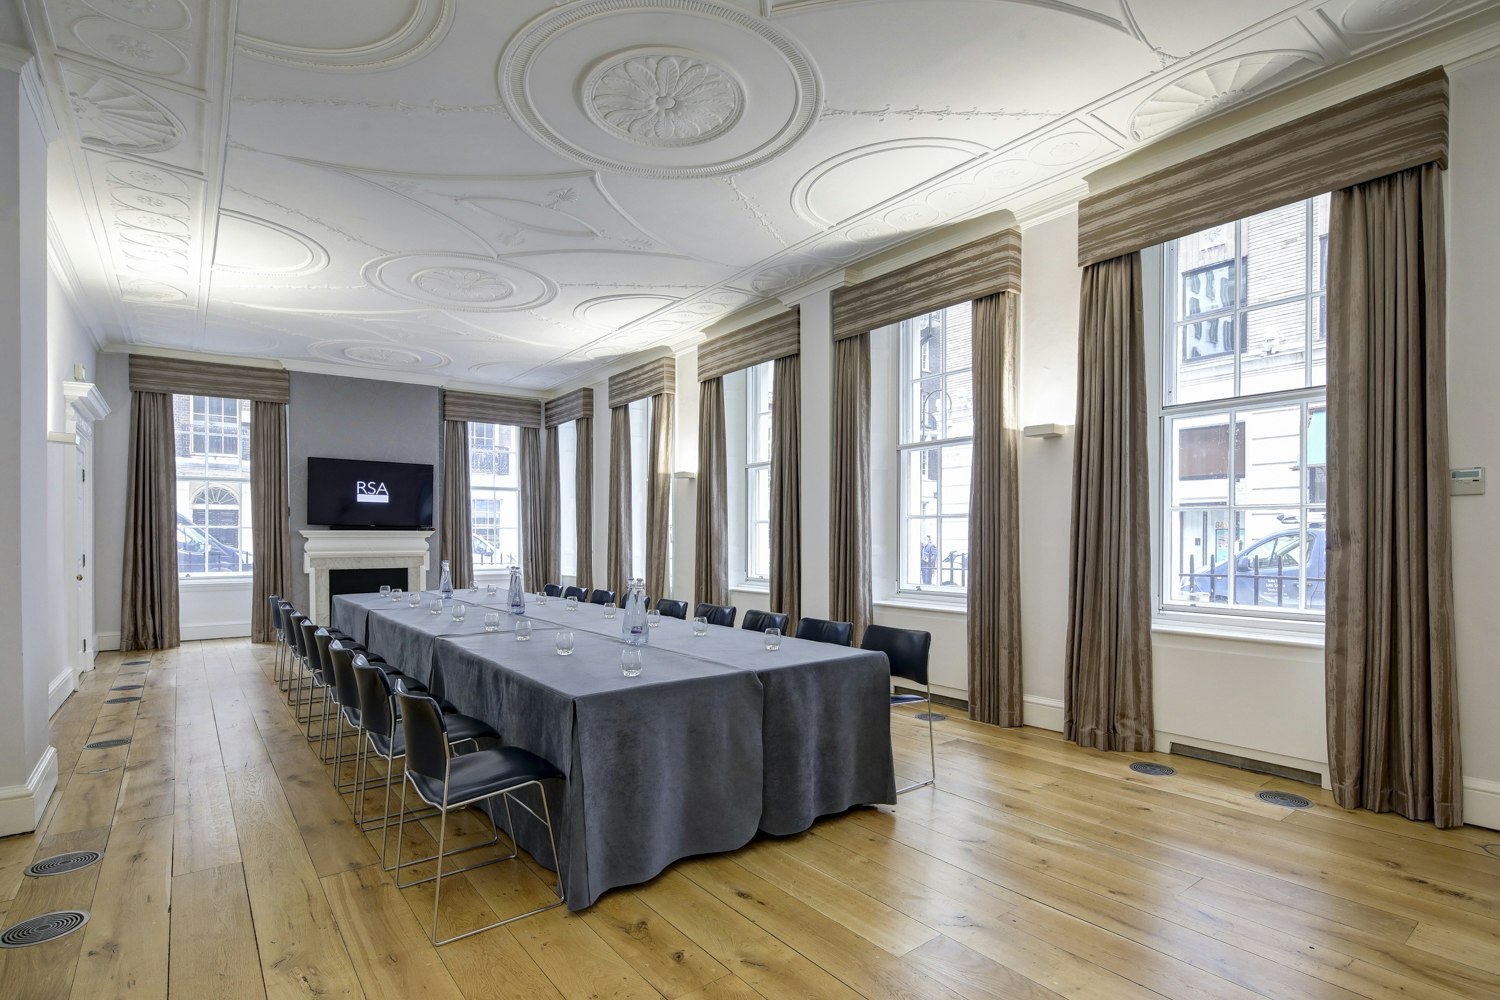 Reception Venues in East London - RSA House